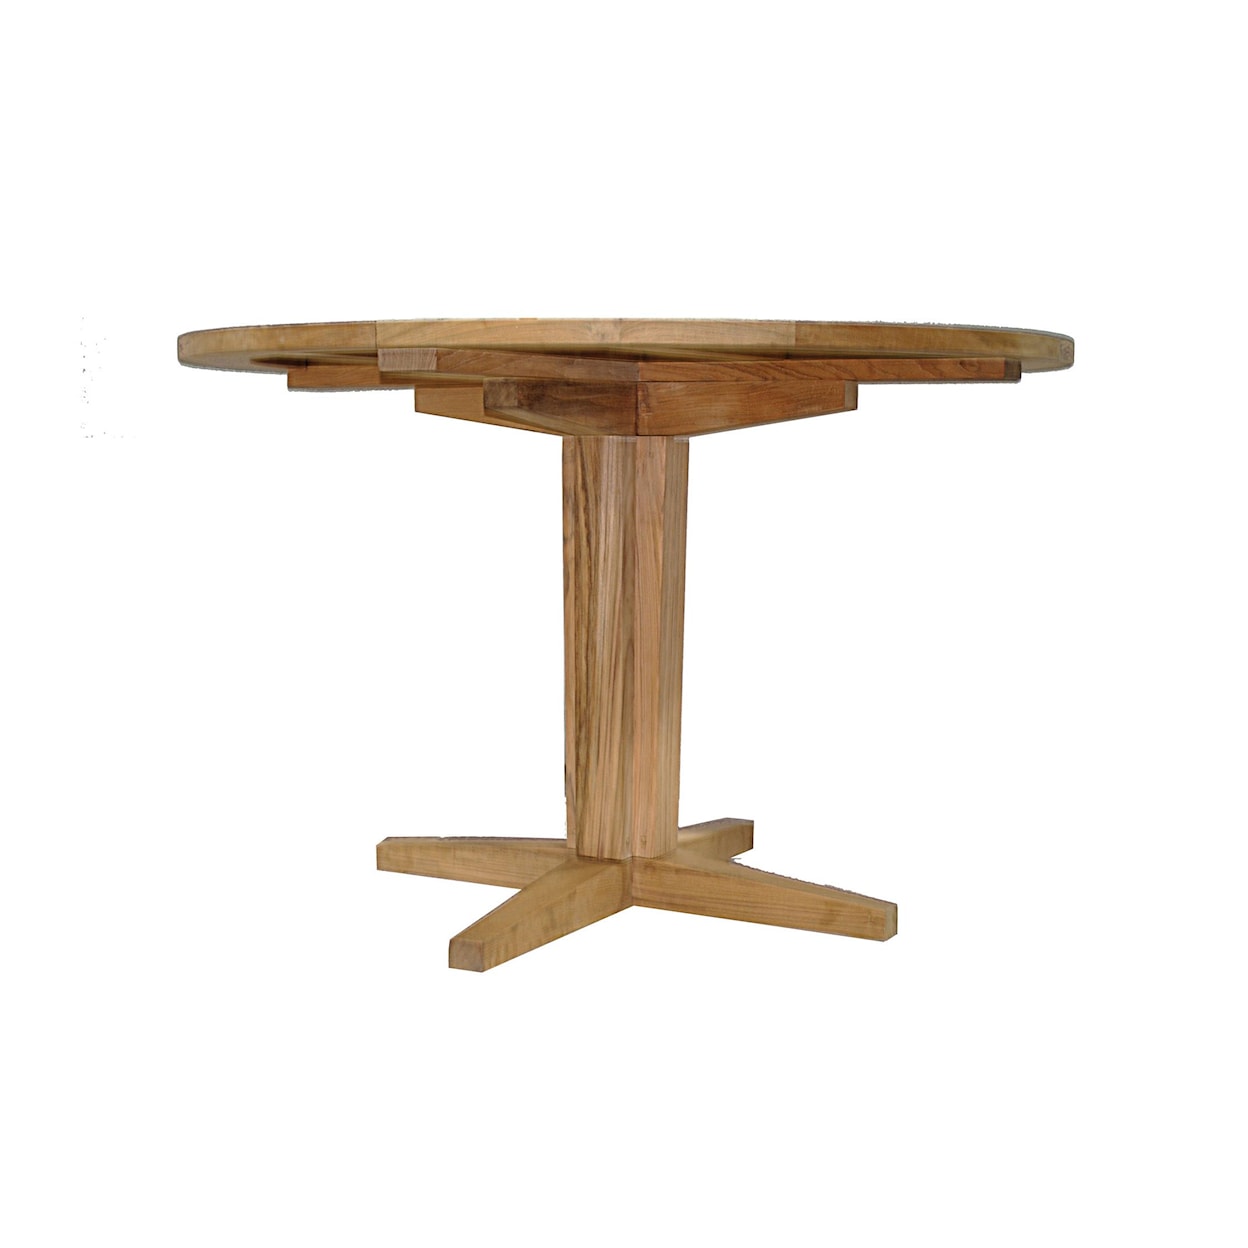 Summer Classics Club Teak Outdoor Dining Table with 48'' Round Top